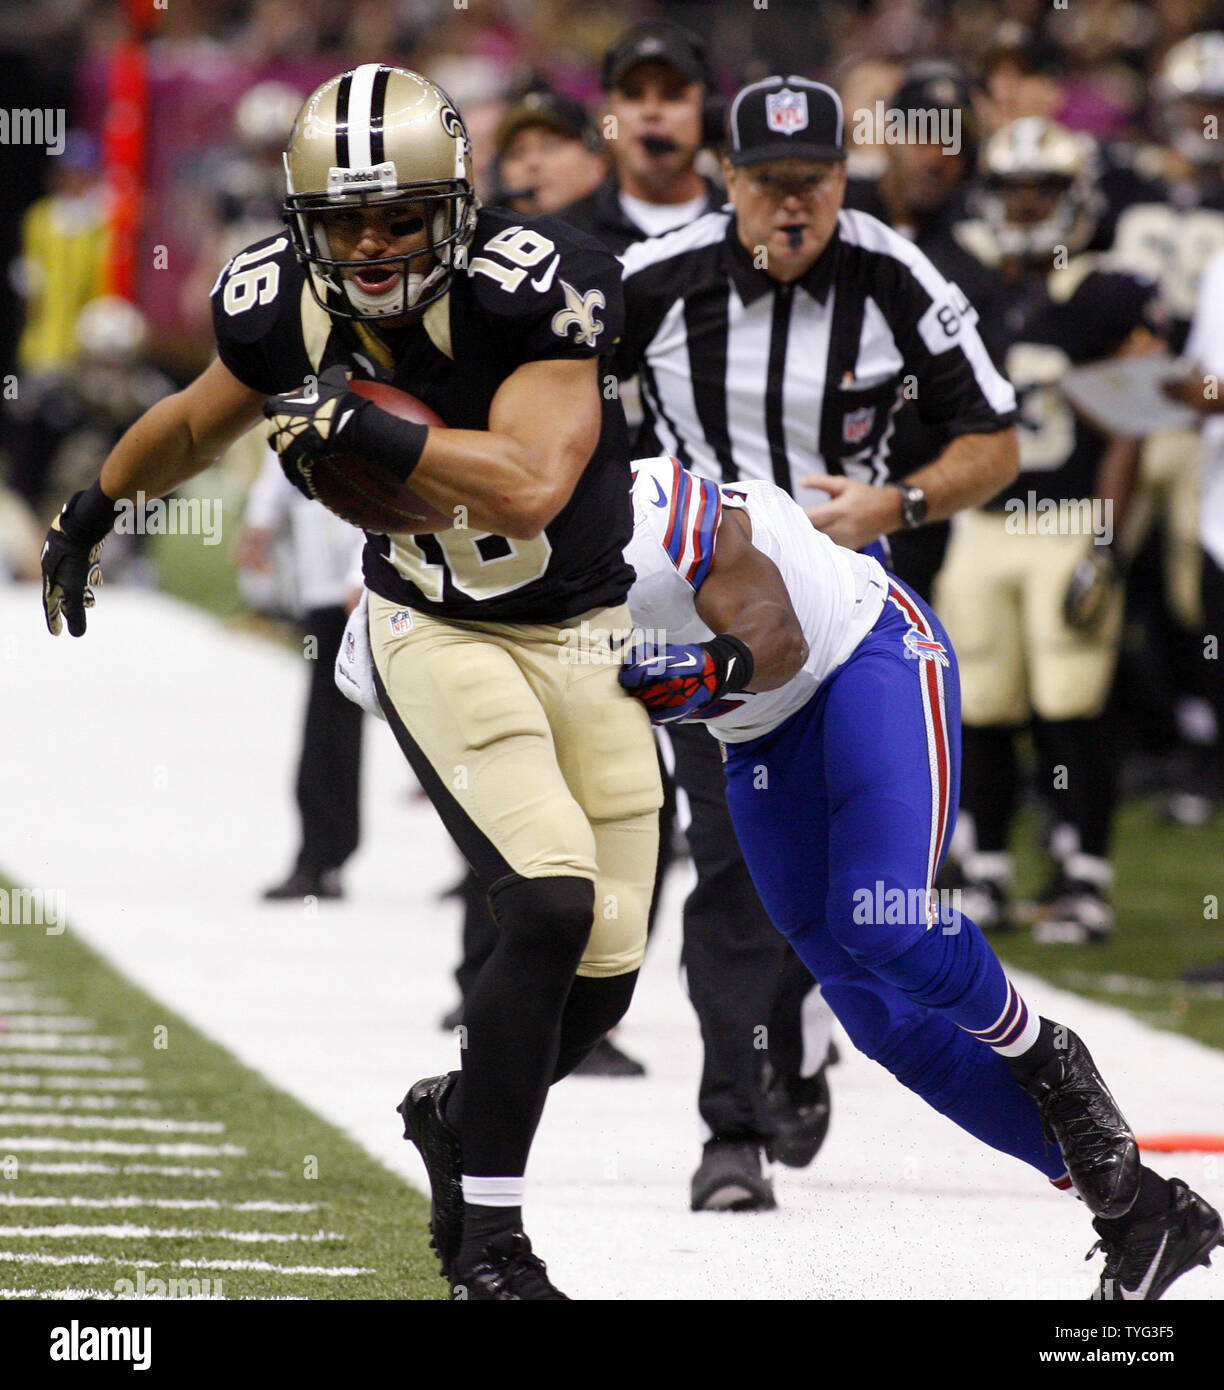 New Orleans Saints wide receiver Lance Moore (16) picks up 9 yards on a Drew Brees pass before being pushed out of bounds by Buffalo Bills cornerback Leodis McKelvin (21) during the second quarter at the Mercedes-Benz Superdome in New Orleans, Louisiana on October 27, 2013.    UPI/A.J. Sisco Stock Photo